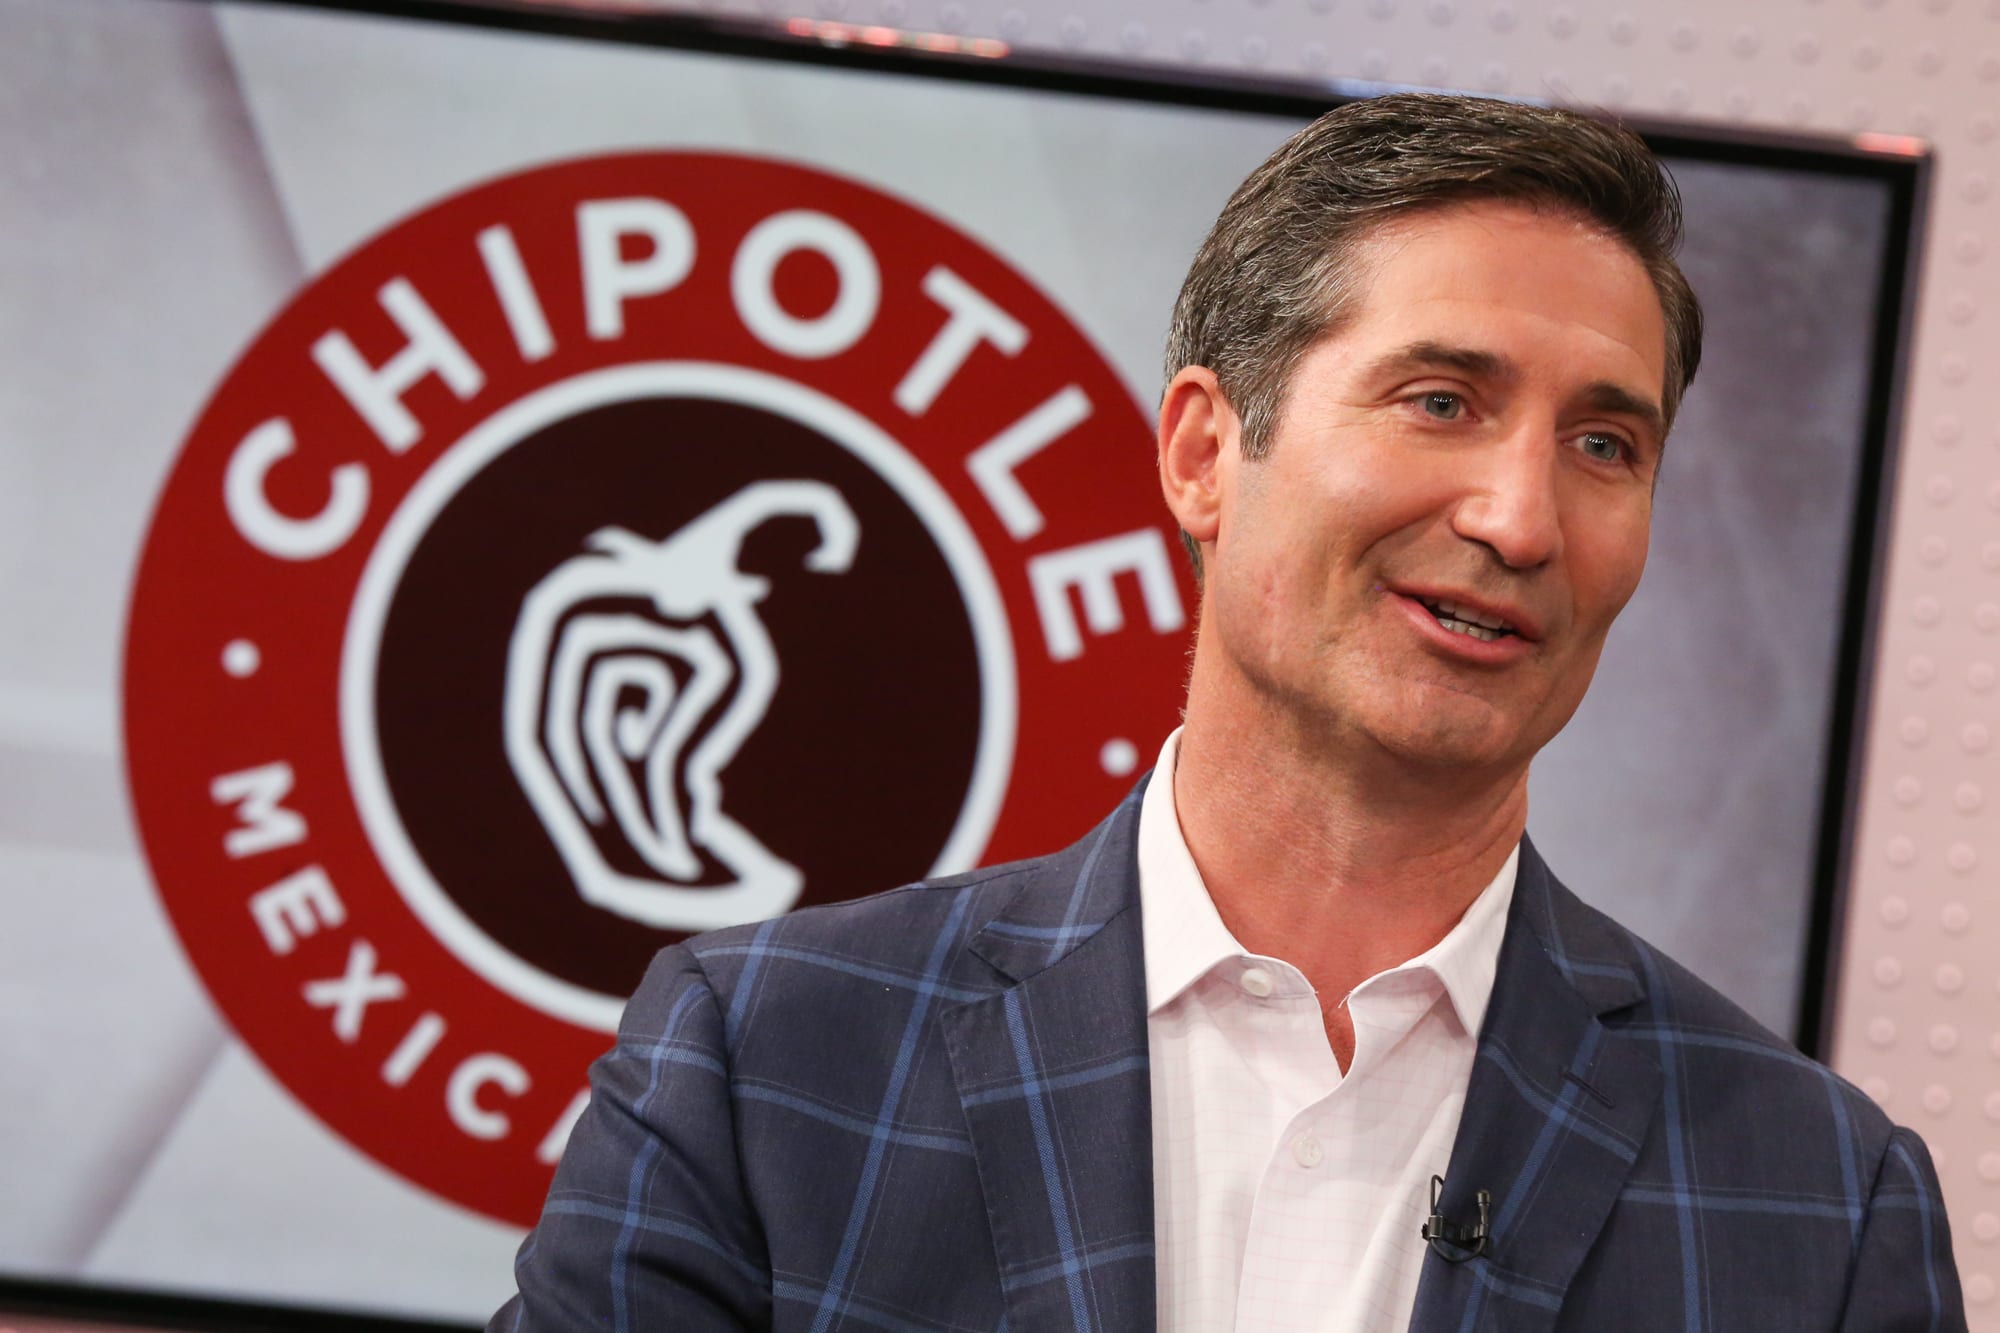 Restaurant updates give Chipotle ‘enormous benefit’ in deliveries: CEO